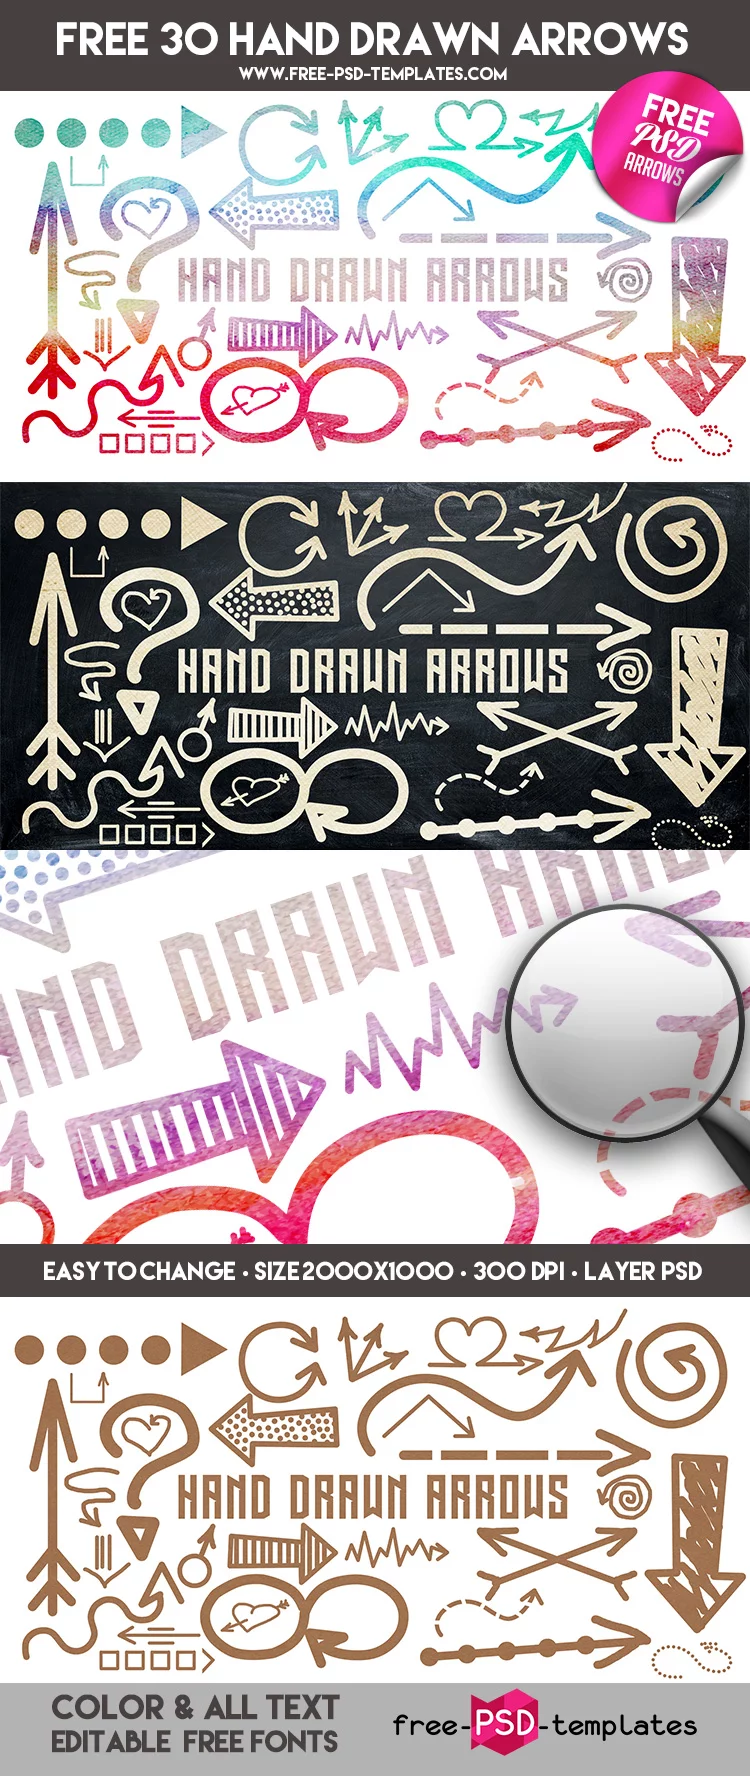 Preview_Free_30_Hand_Drawn_Arrows